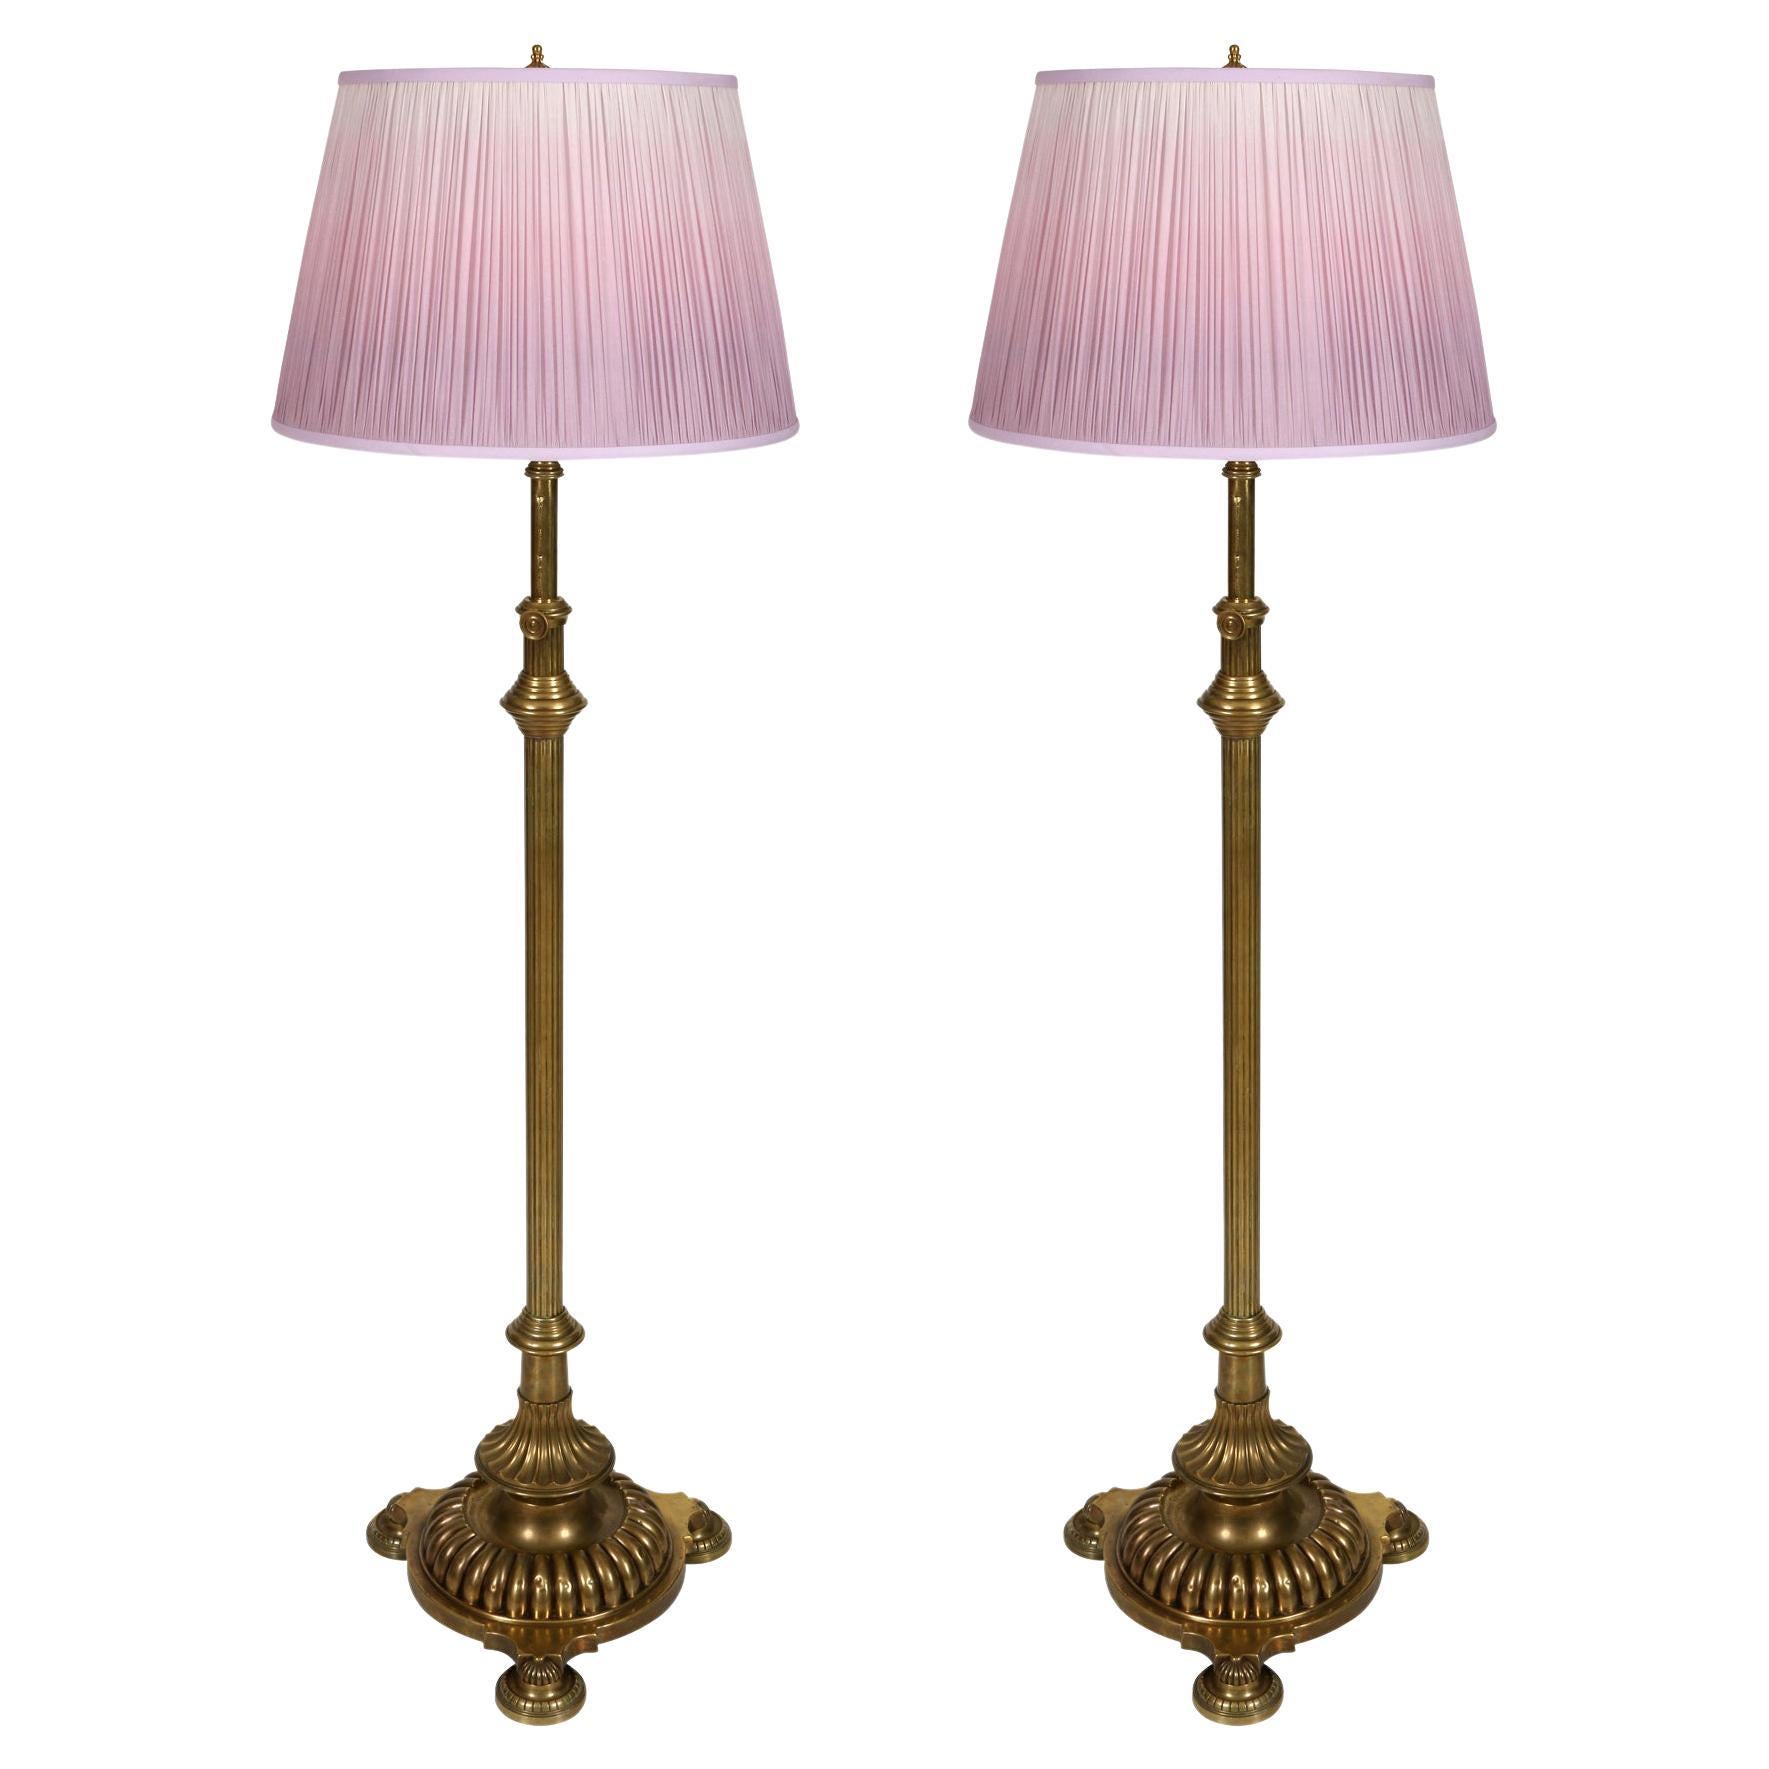 Pair of Heavy English Brass Telescoping Floor Lamps For Sale at 1stDibs